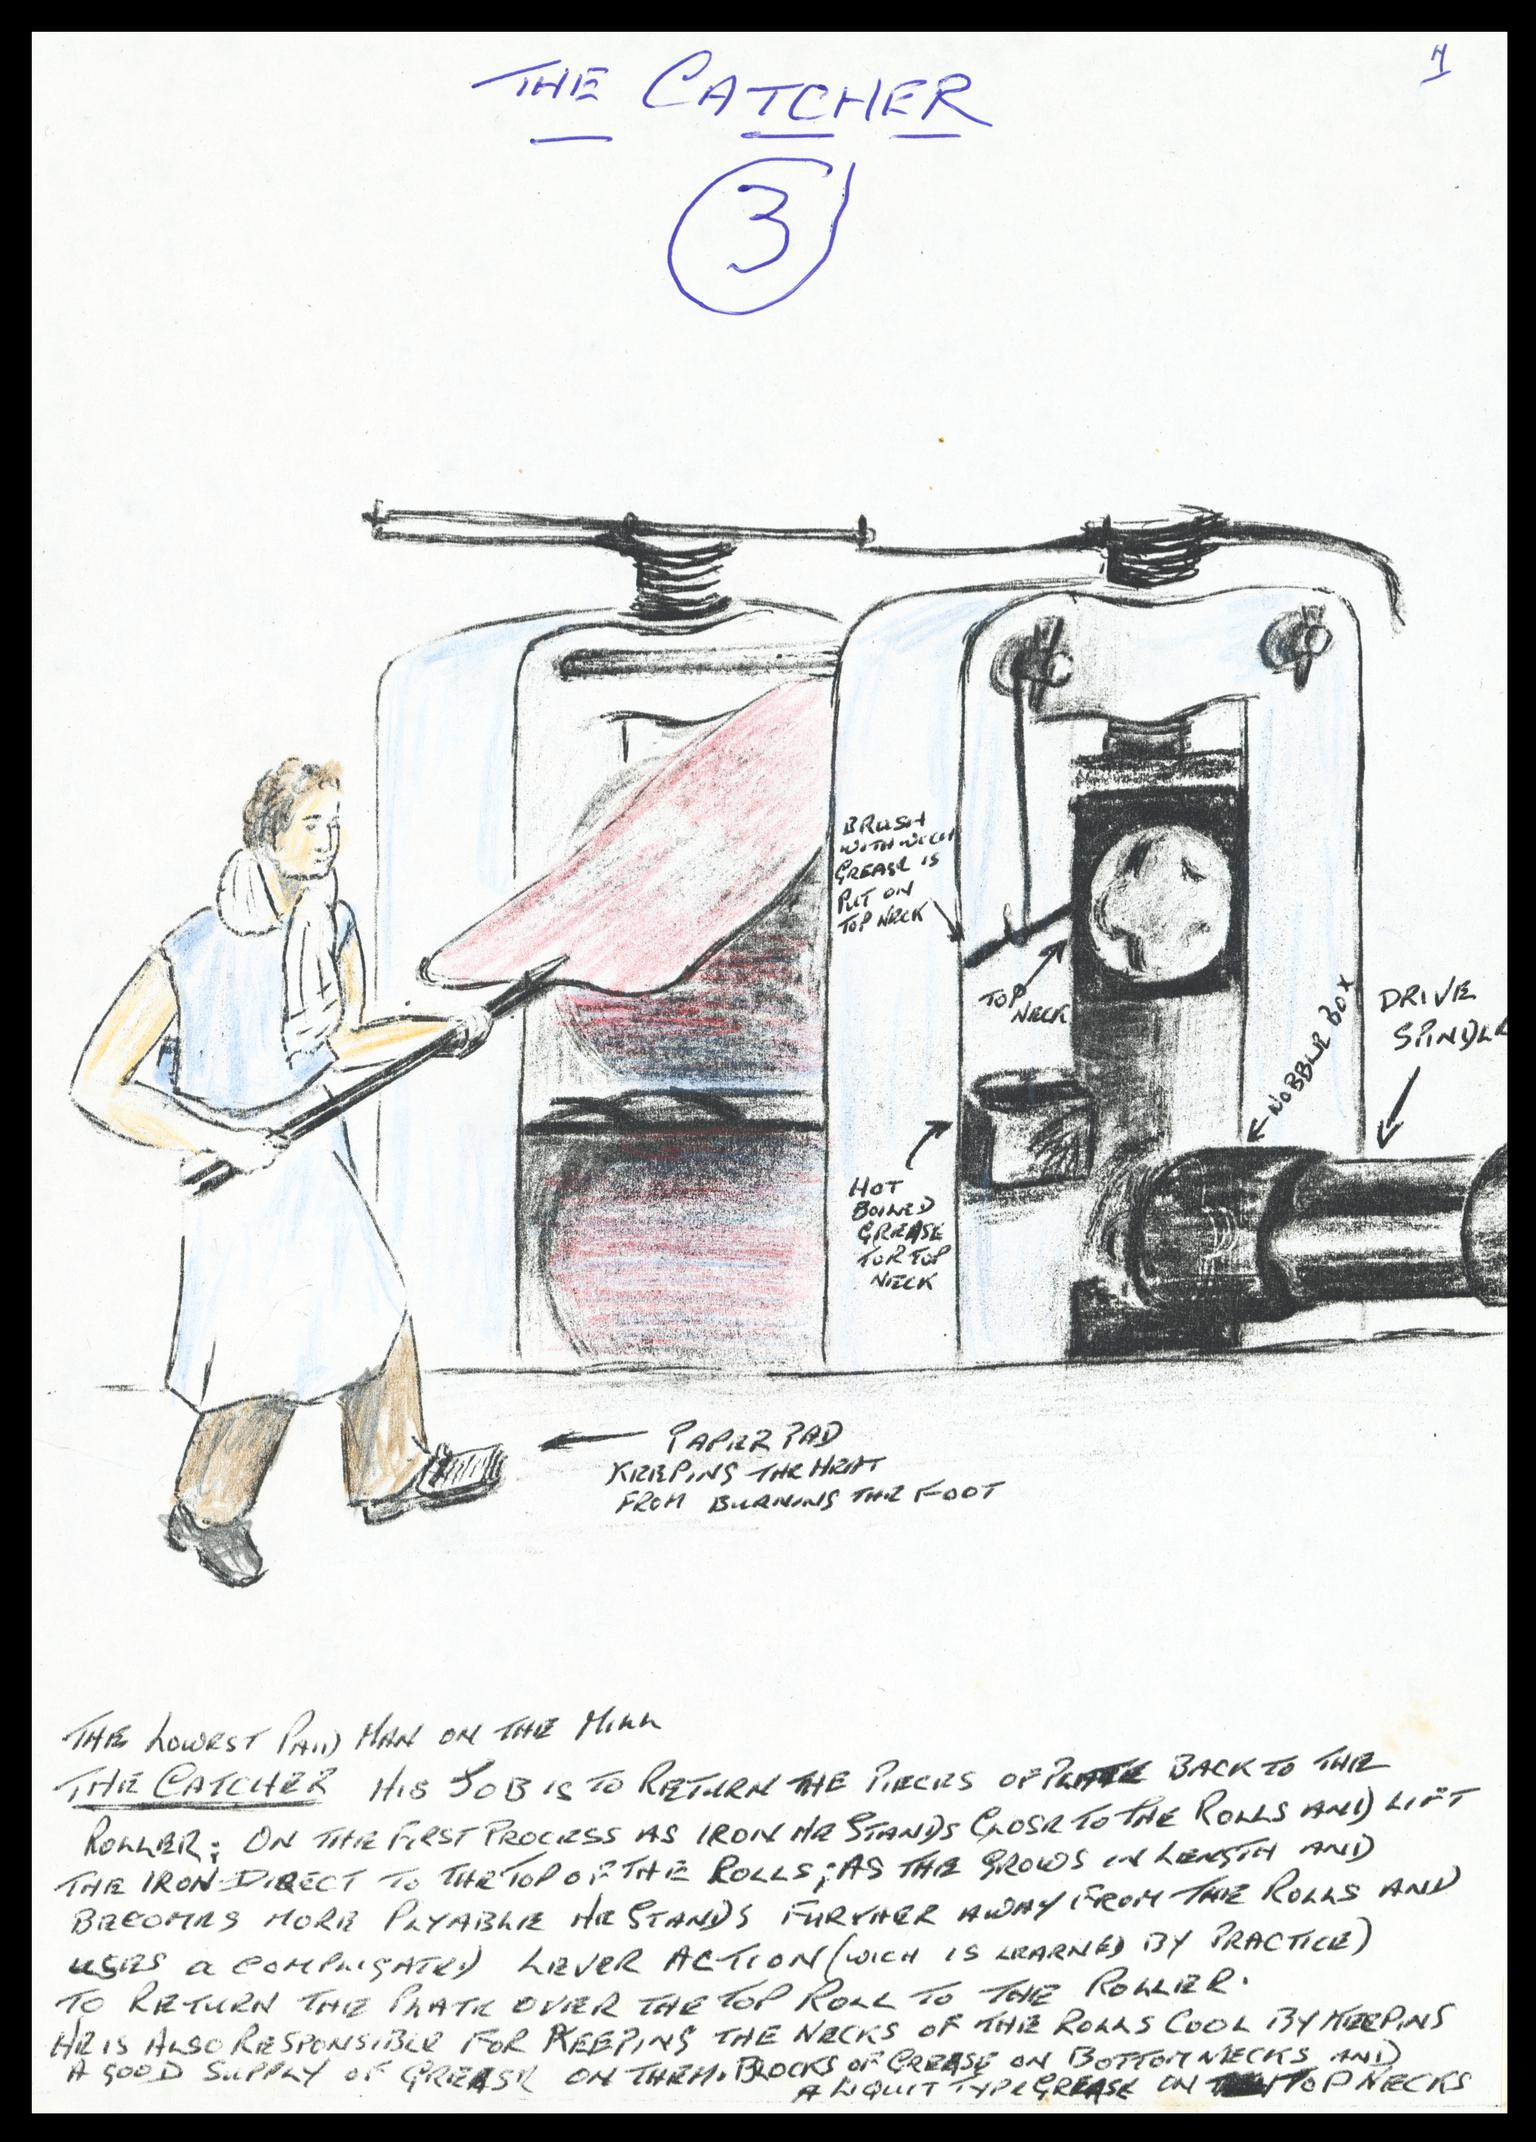 Processes in the Welsh tinplate industry, drawing